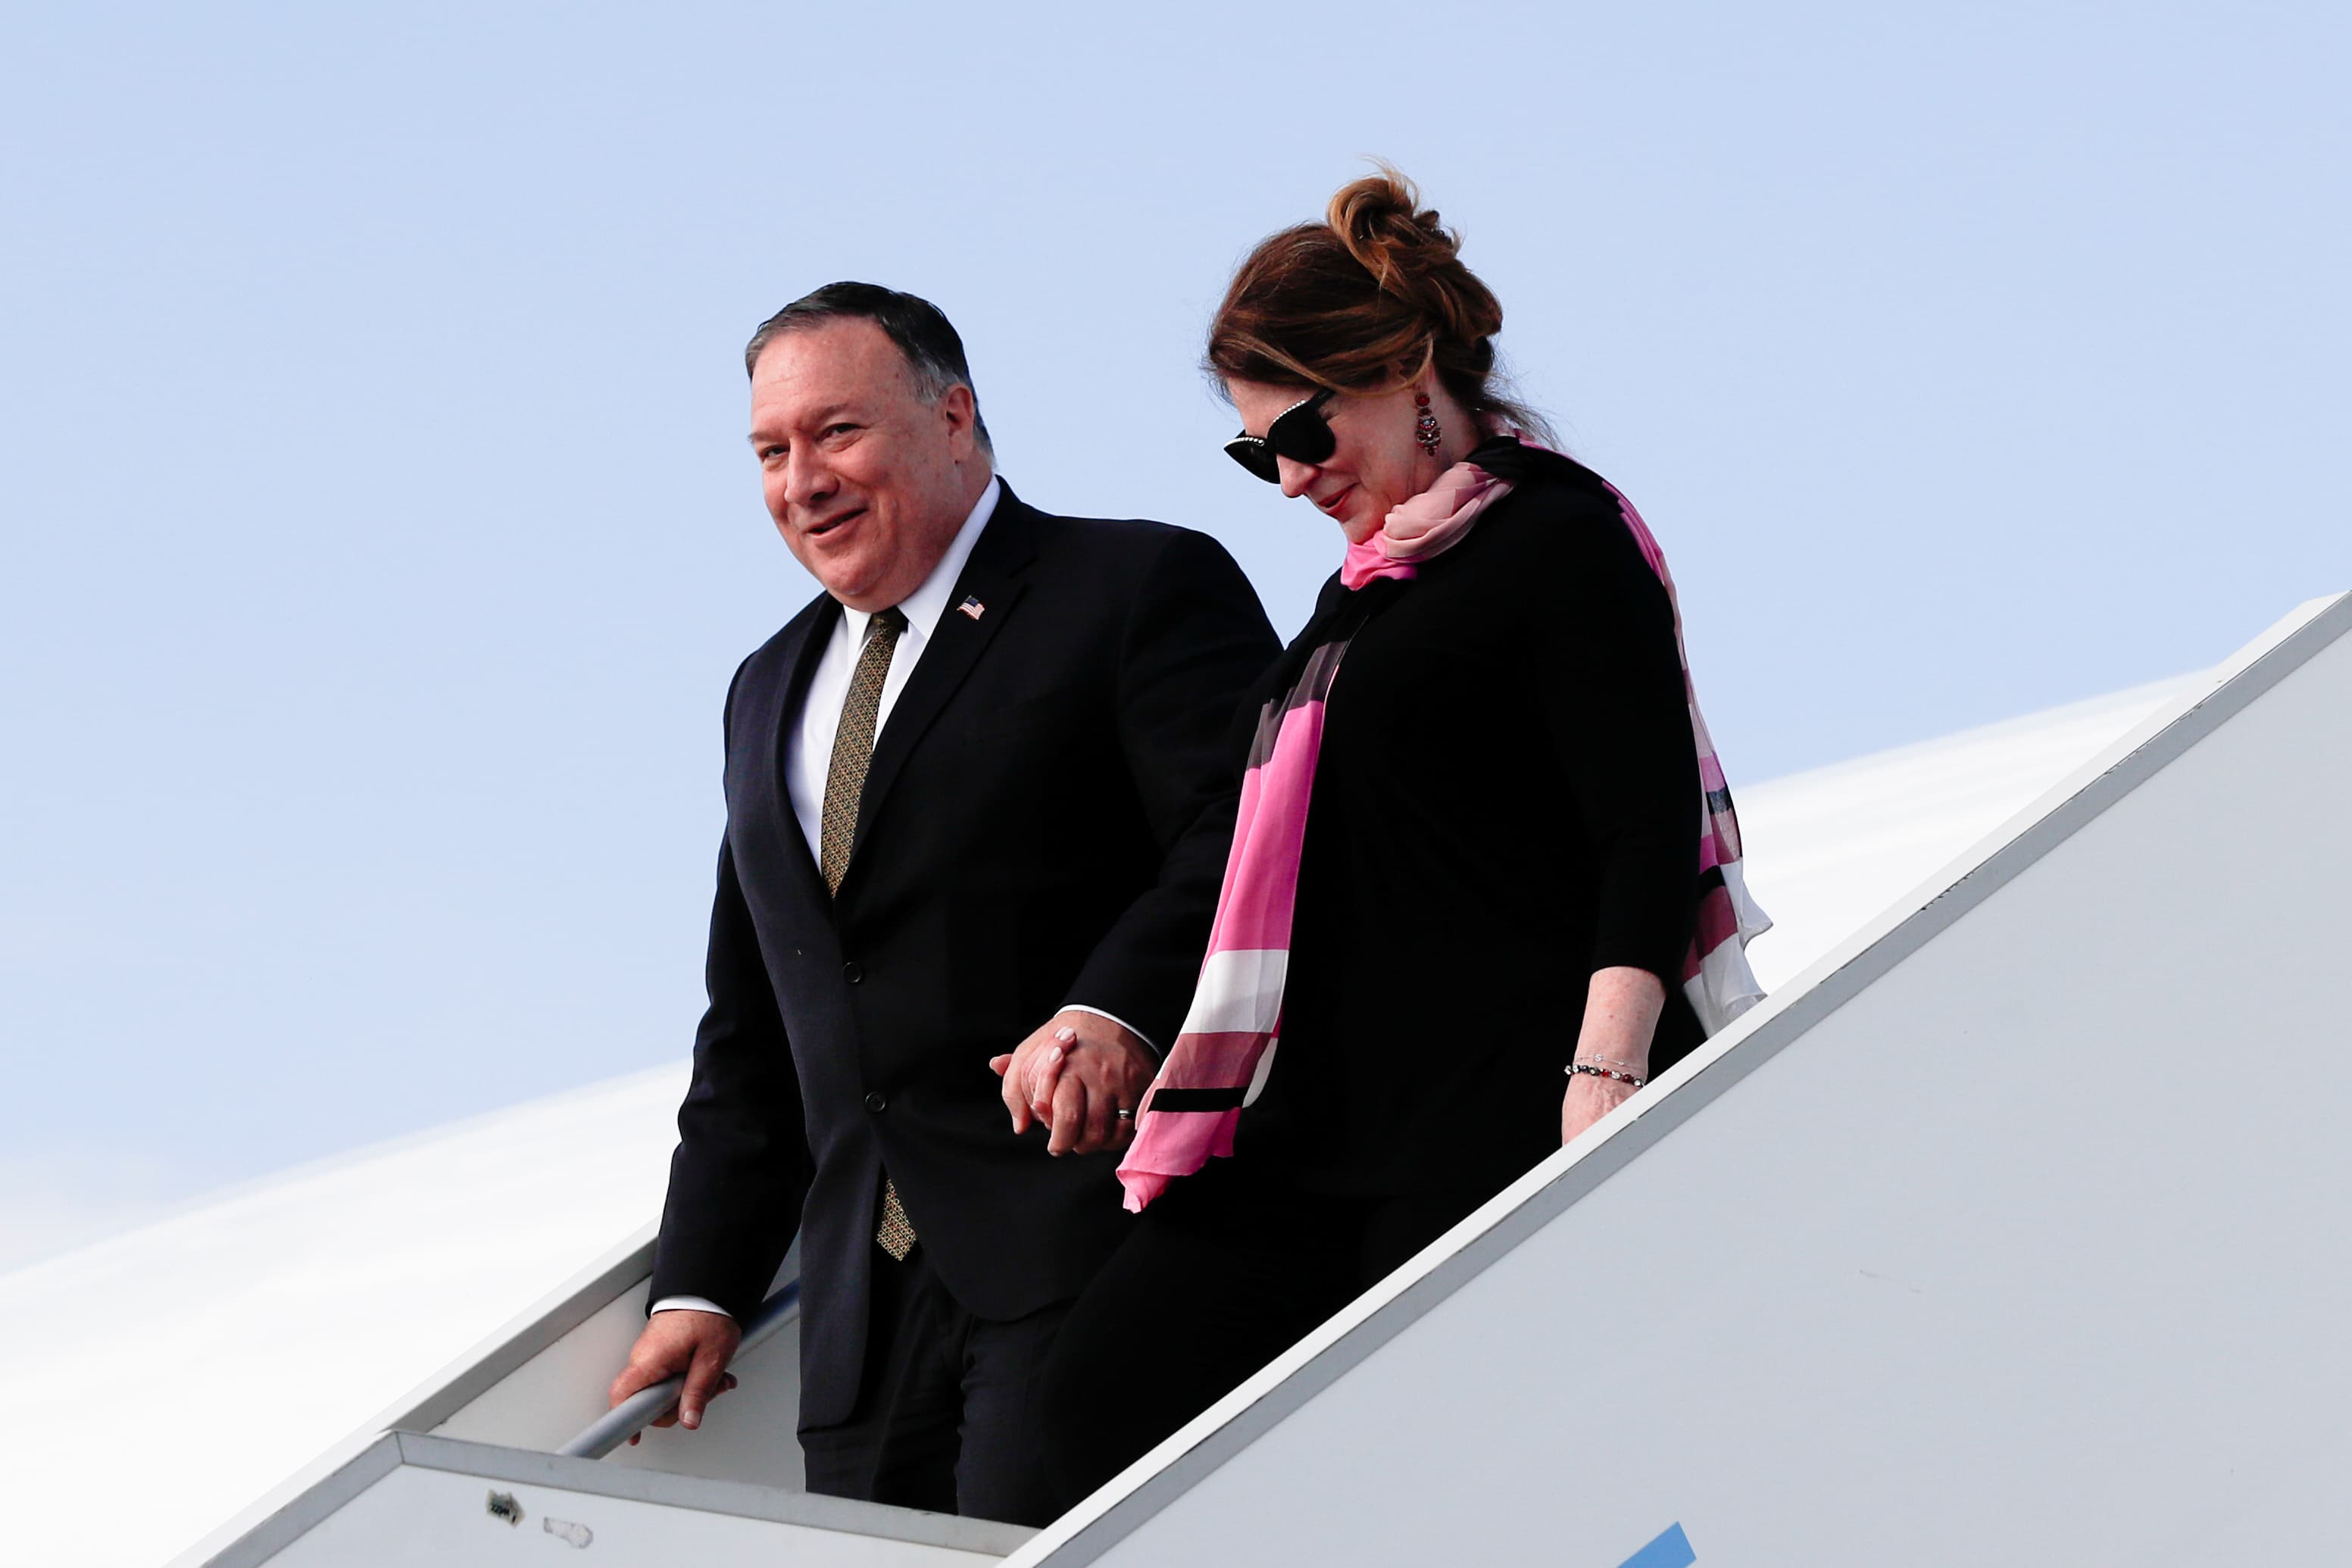 Mike Pompeo spent taxpayer funds on pens made in China for elite dinners